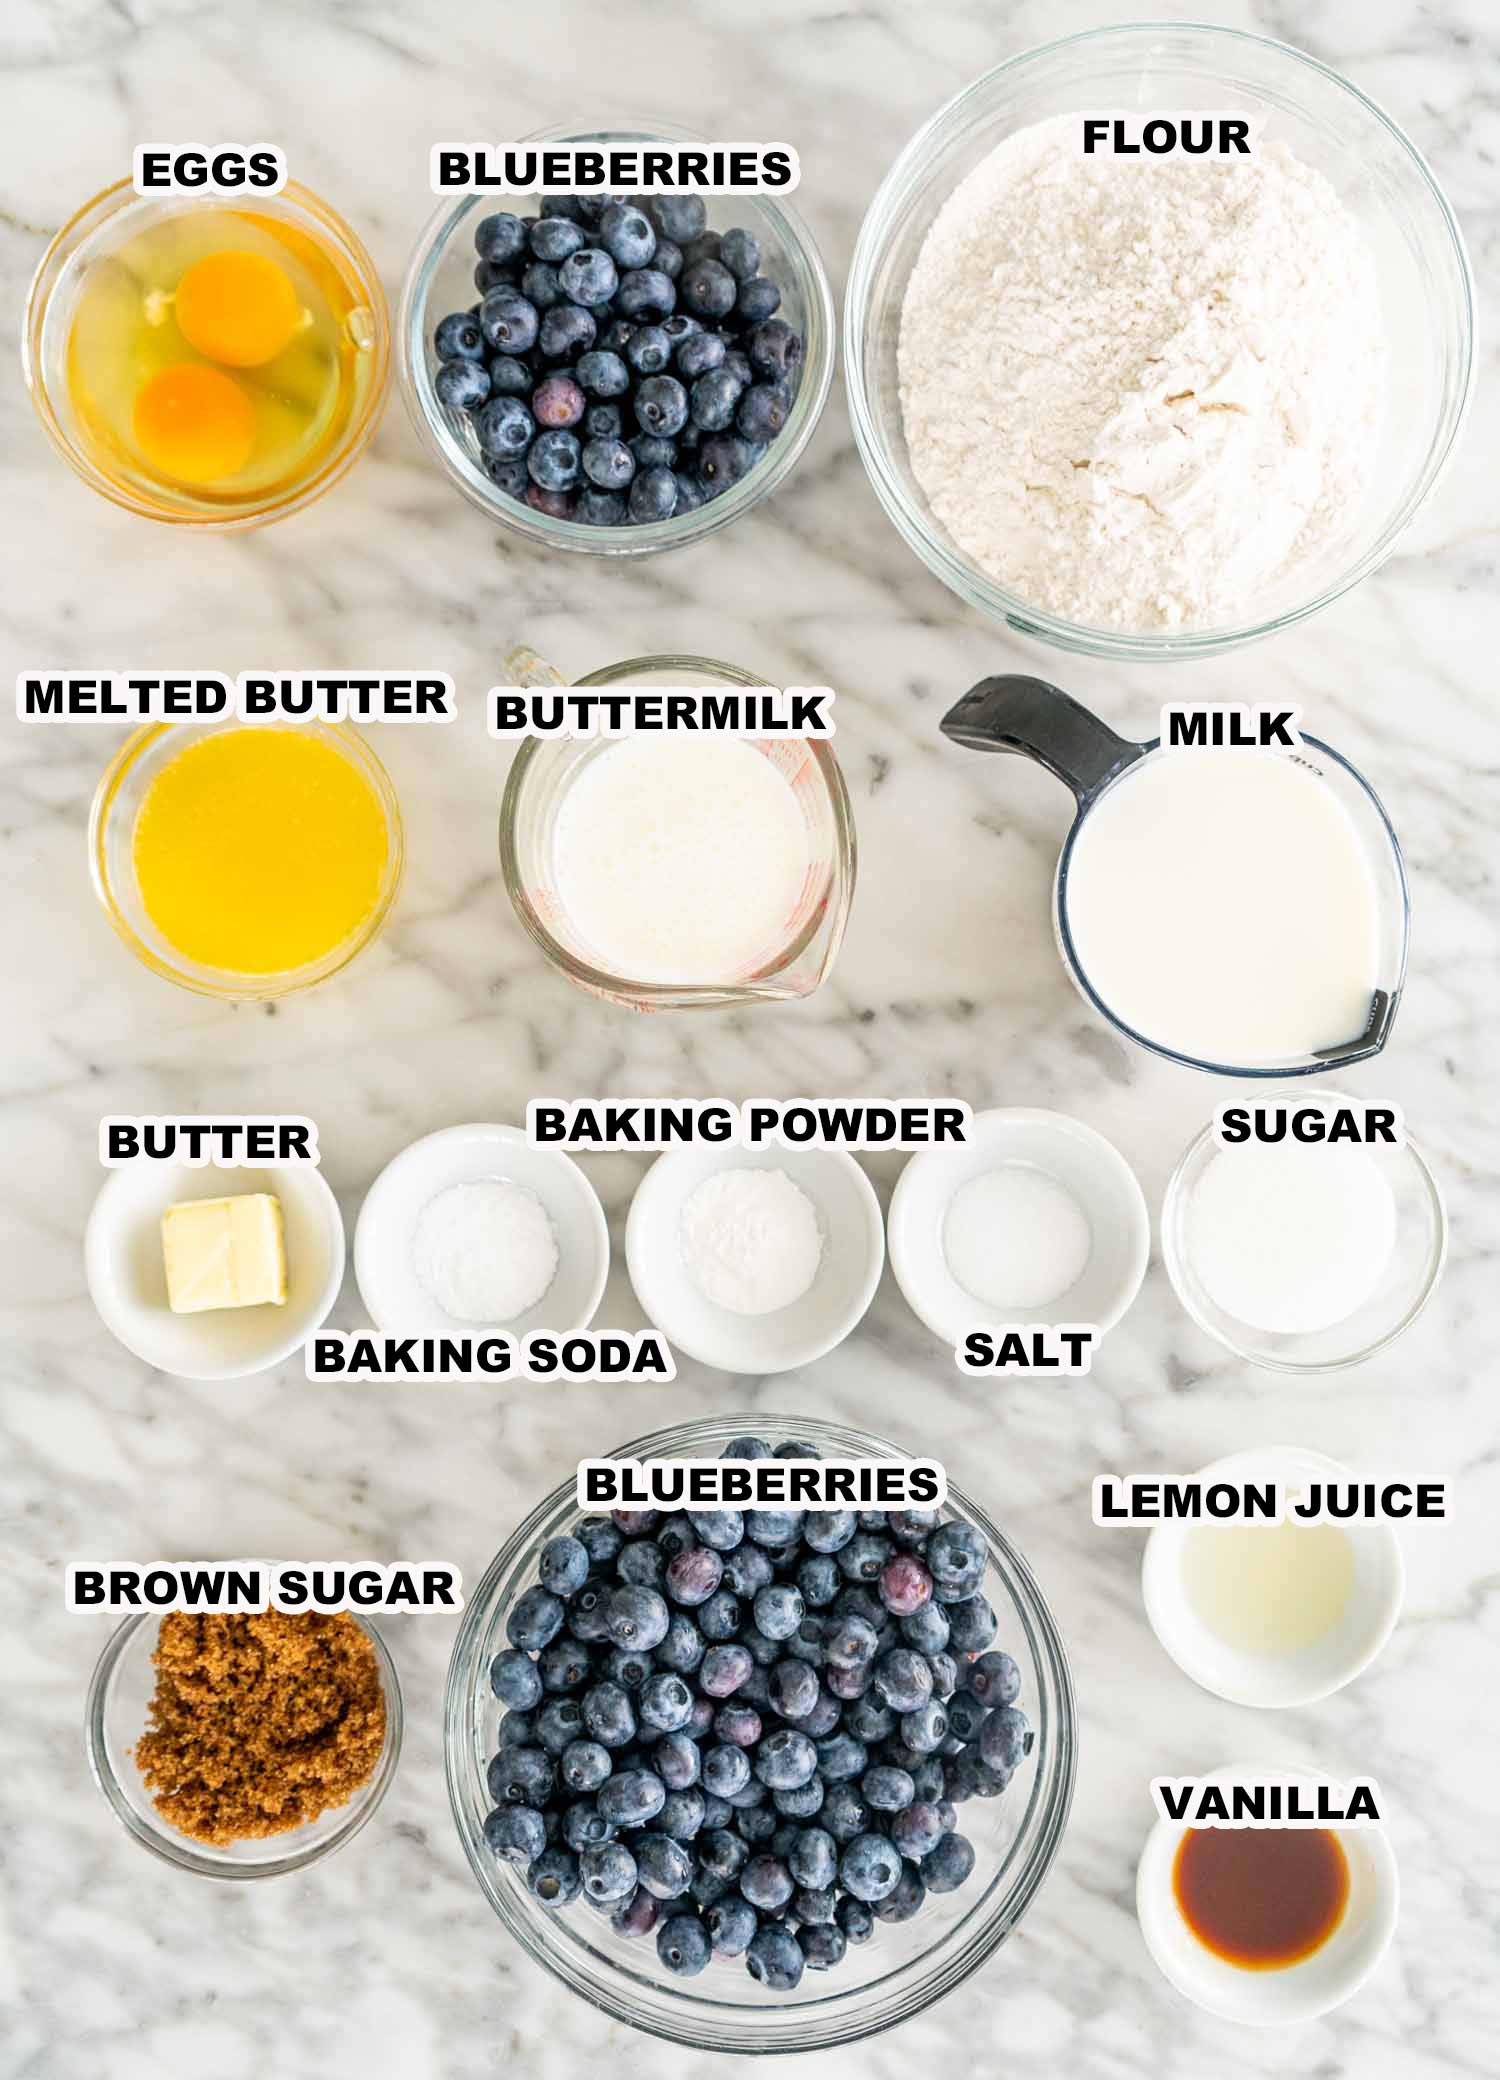 ingredients needed to make blueberry buttermilk pancakes.